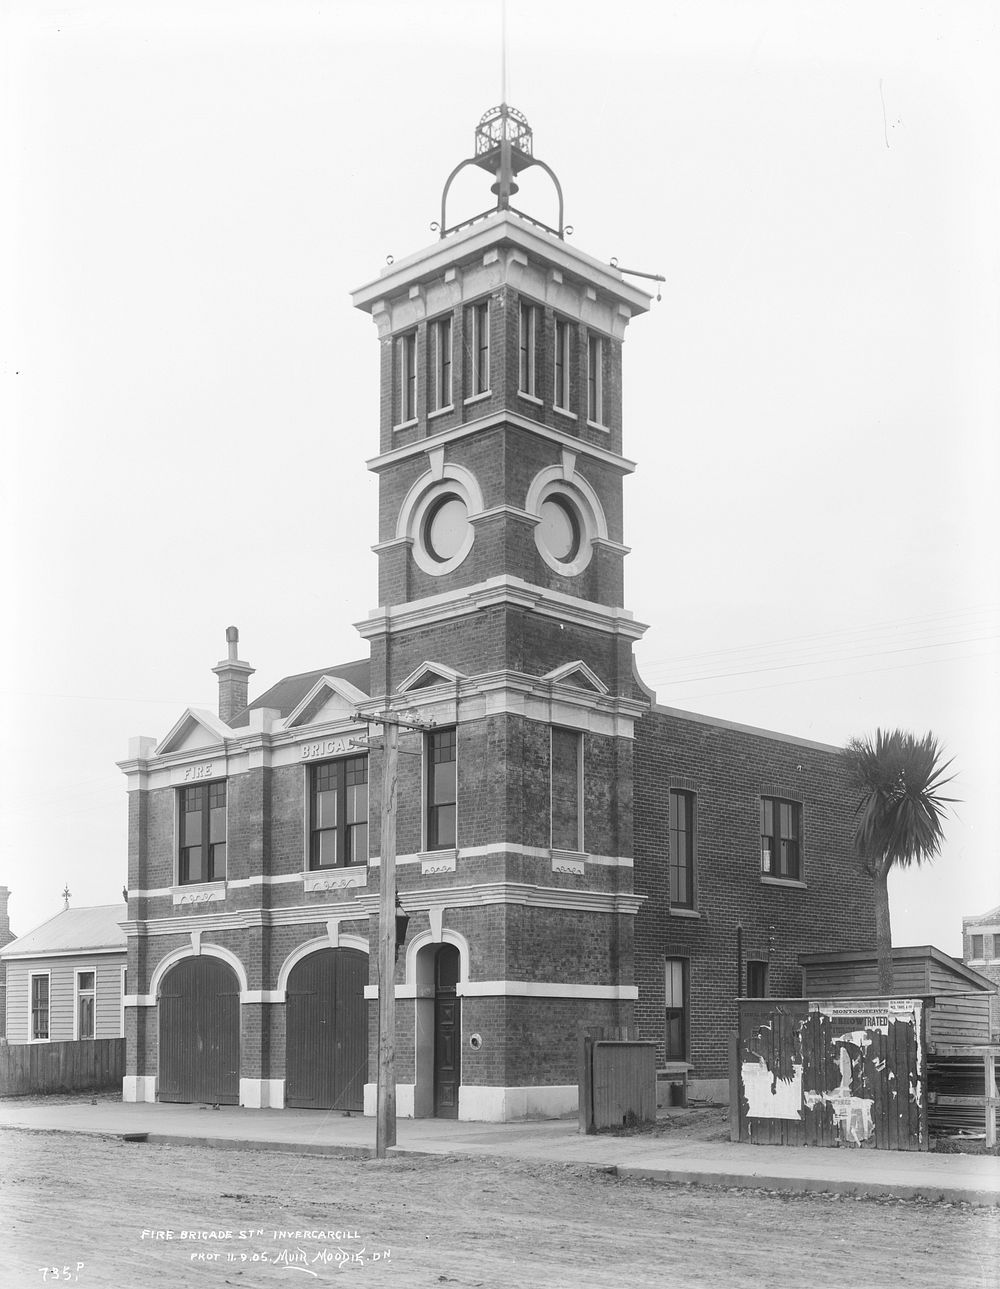 Fire Brigade Station, Invercargill (circa 1905) by Muir and Moodie.